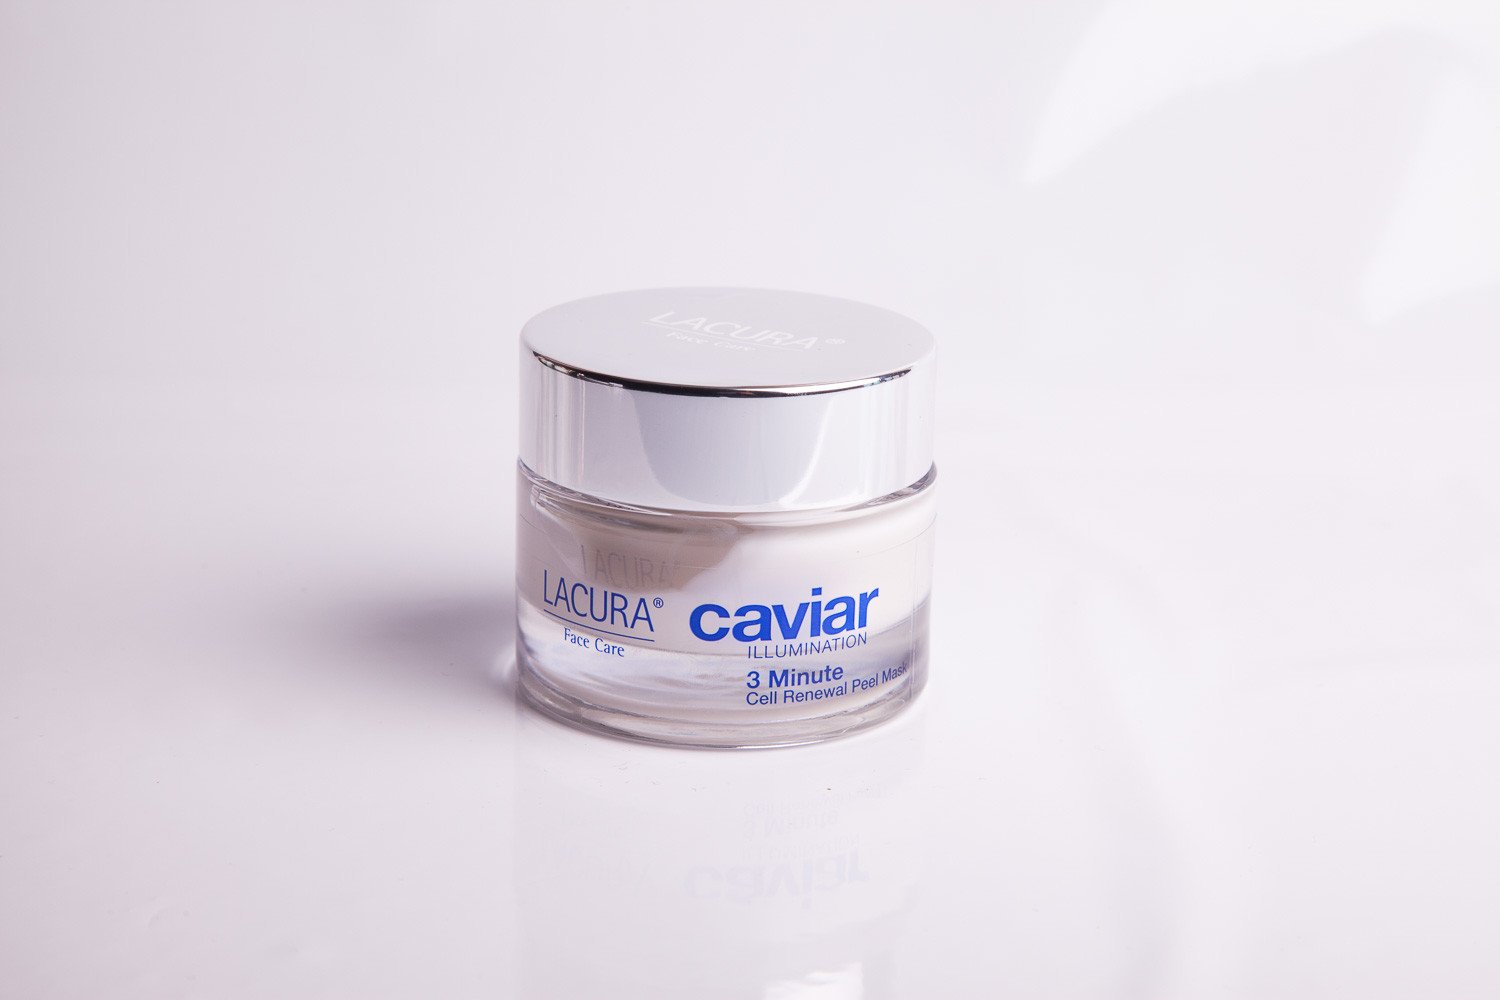 An image of the Aldi caviar illumination peel mask in front of a white background